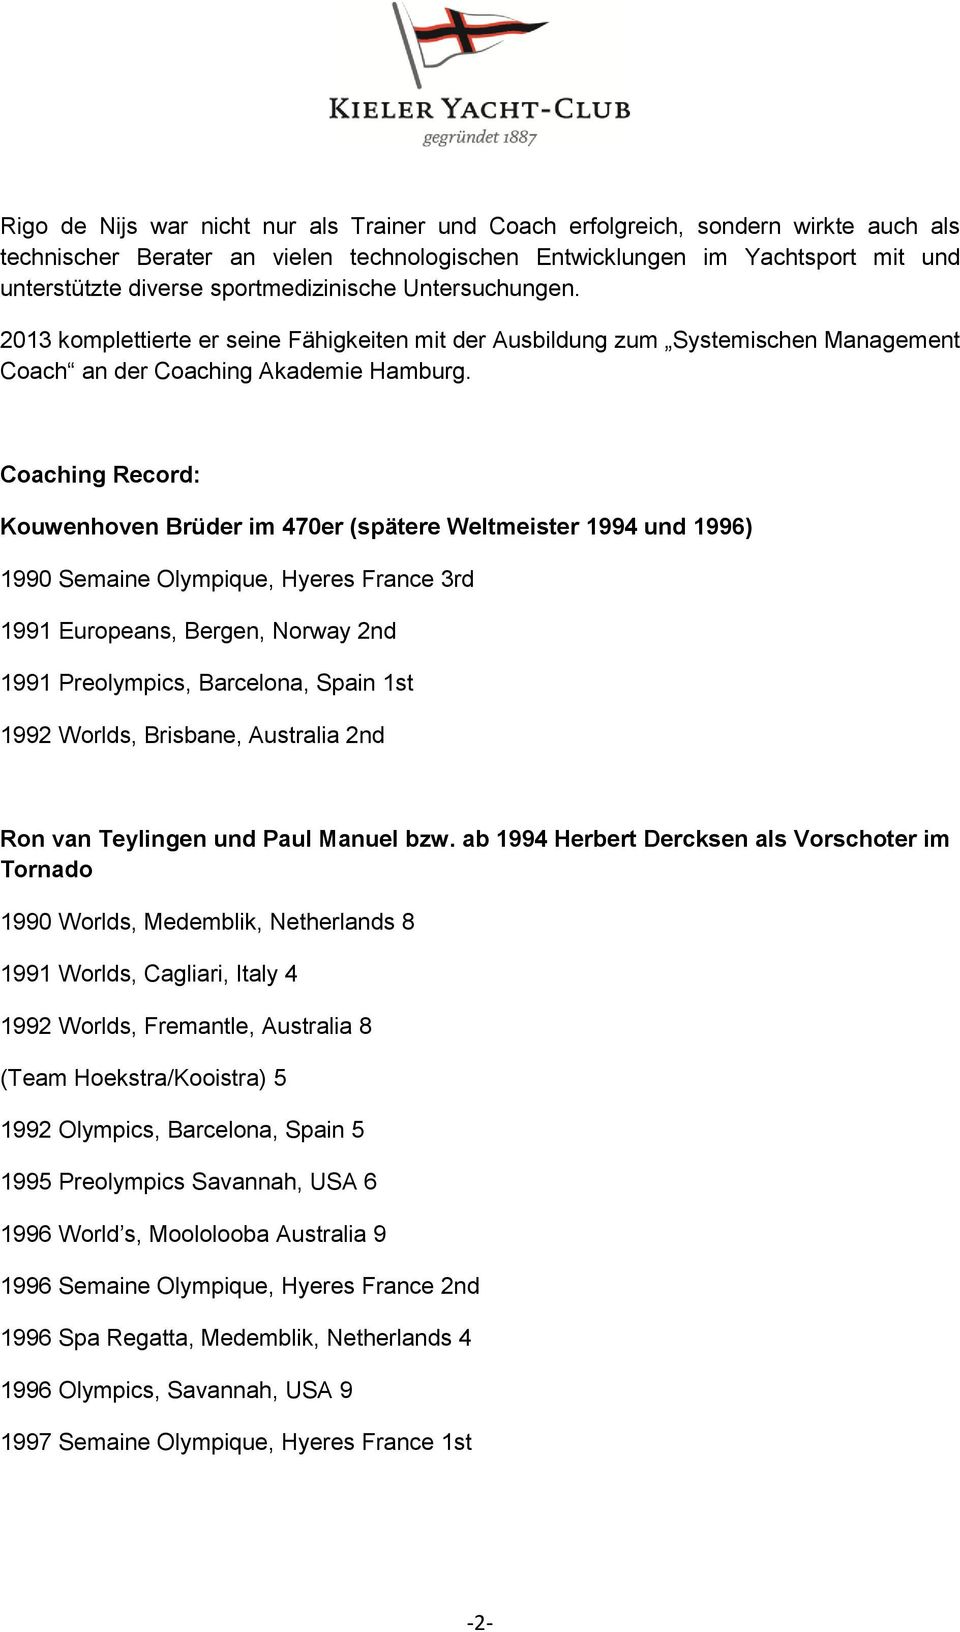 Coaching Record: Kouwenhoven Brüder im 470er (spätere Weltmeister 1994 und 1996) 1990 Semaine Olympique, Hyeres France 3rd 1991 Europeans, Bergen, Norway 2nd 1991 Preolympics, Barcelona, Spain 1st